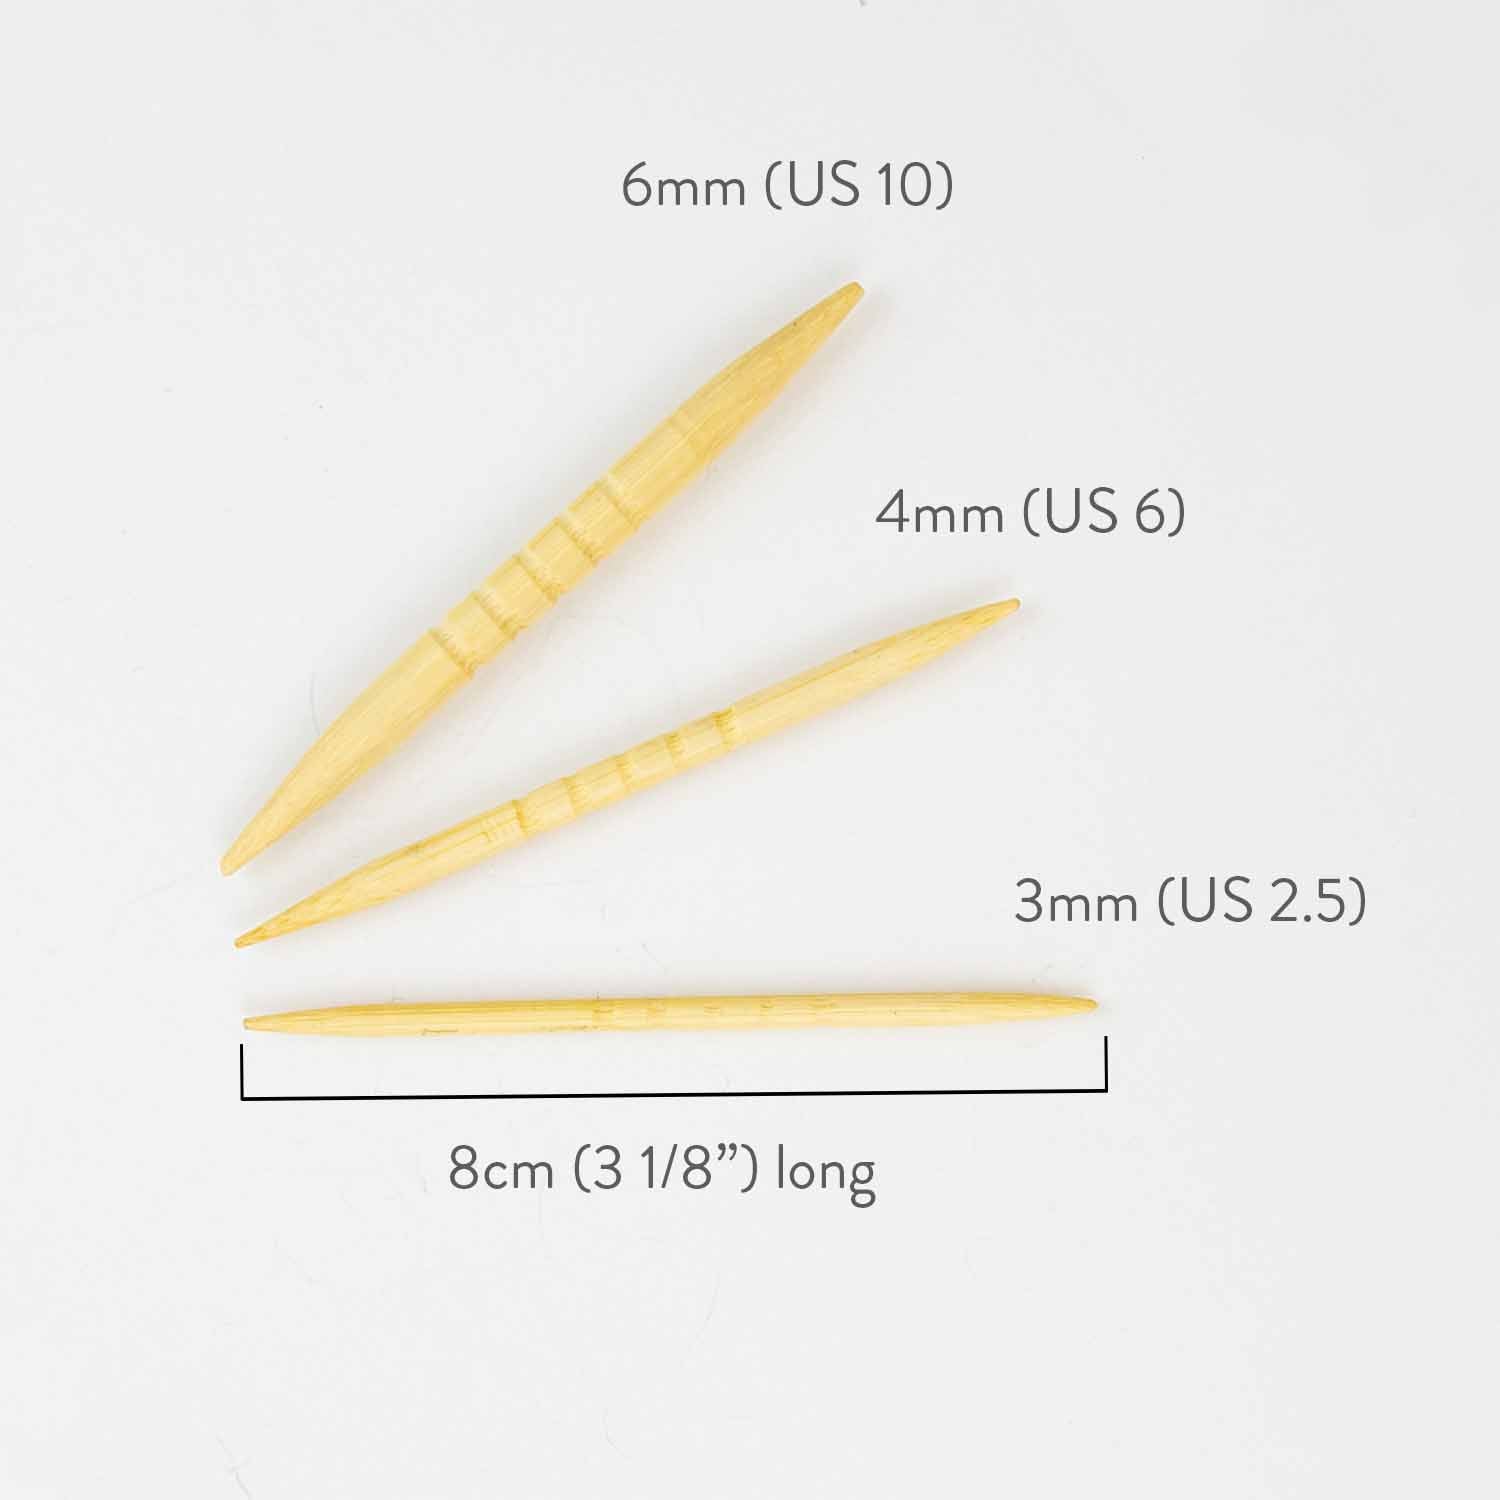 Extra Tools for Knitting: Cable Needles